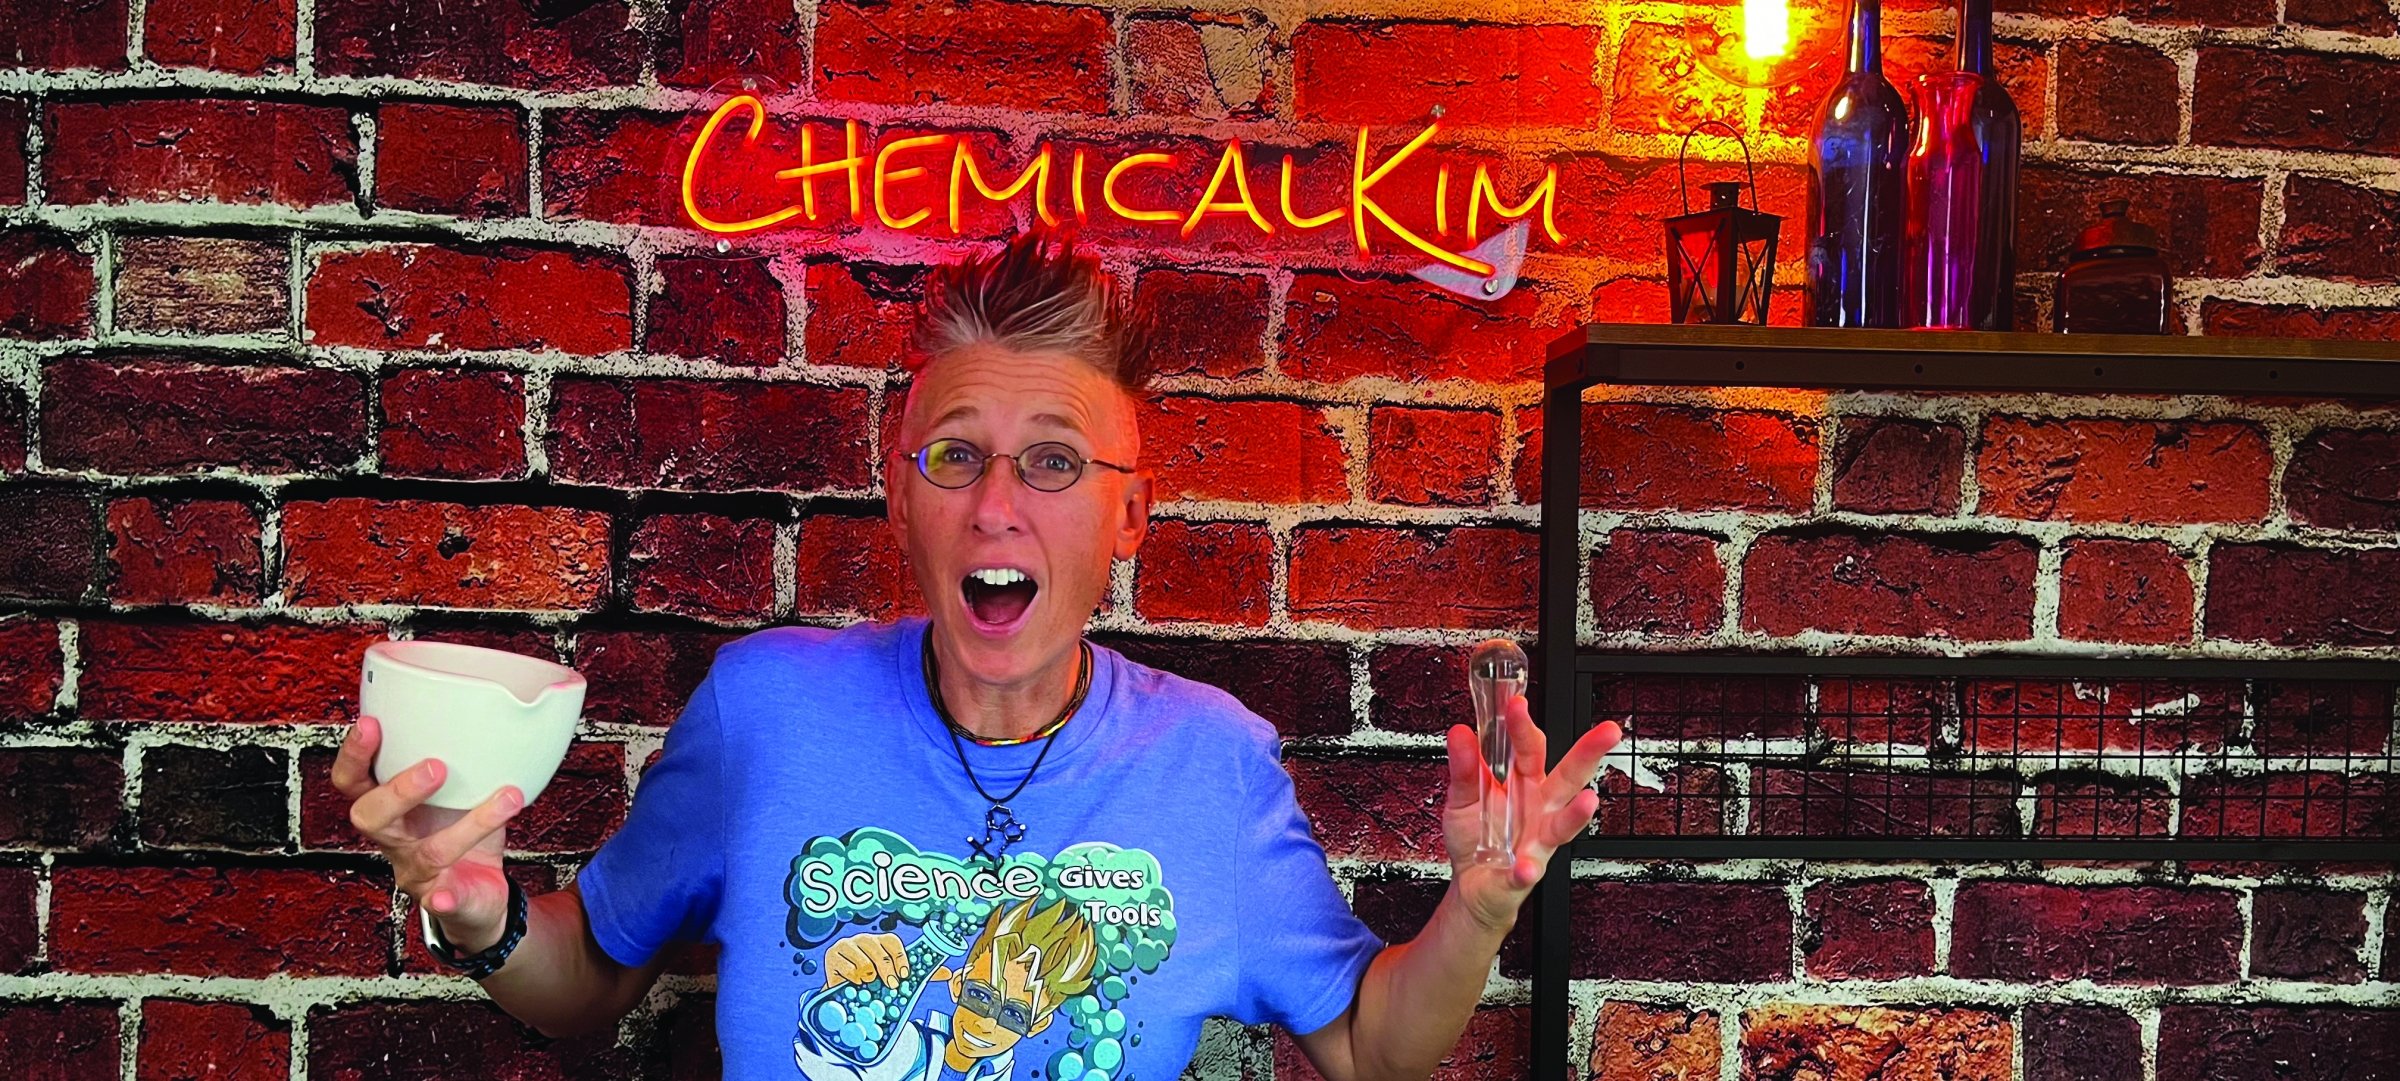 Chemical Kim standing in front of a brick wall with neon Chemical Kim sign holding a bowl and test tube.